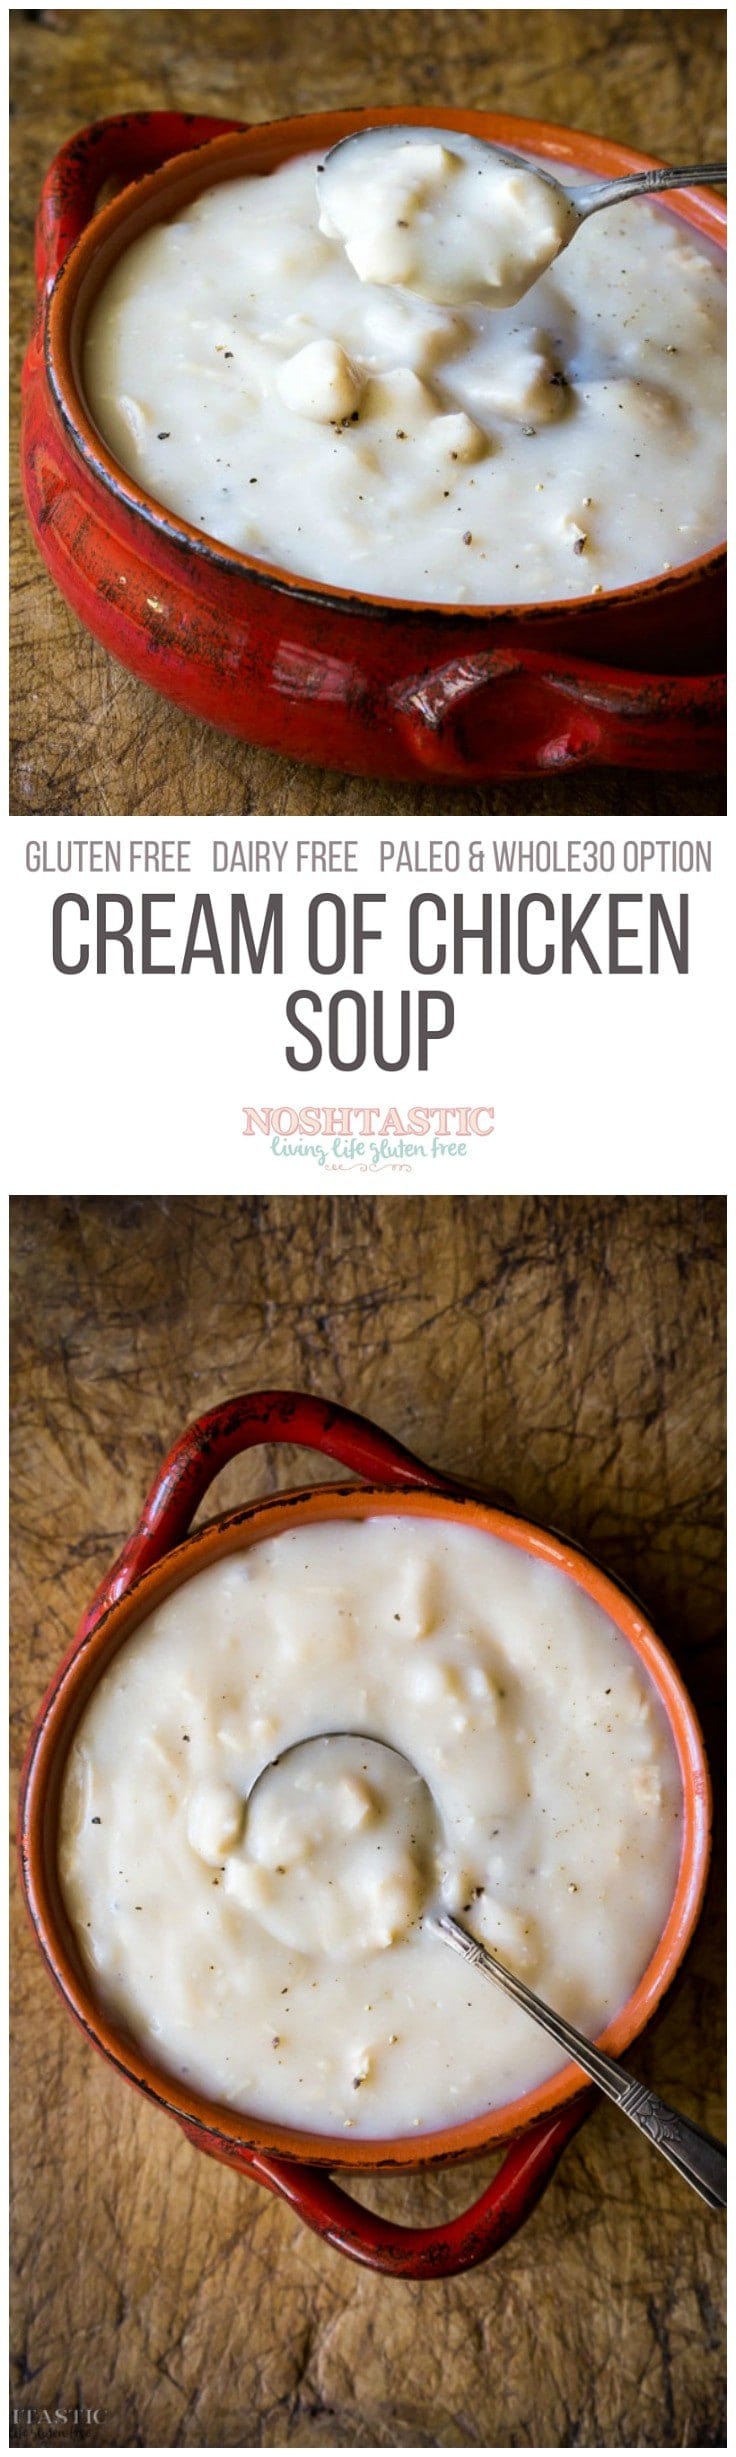 An easy Homemade Gluten Free Cream of Chicken Soup, but without all the additives! Can easily be made Paleo and Whole30